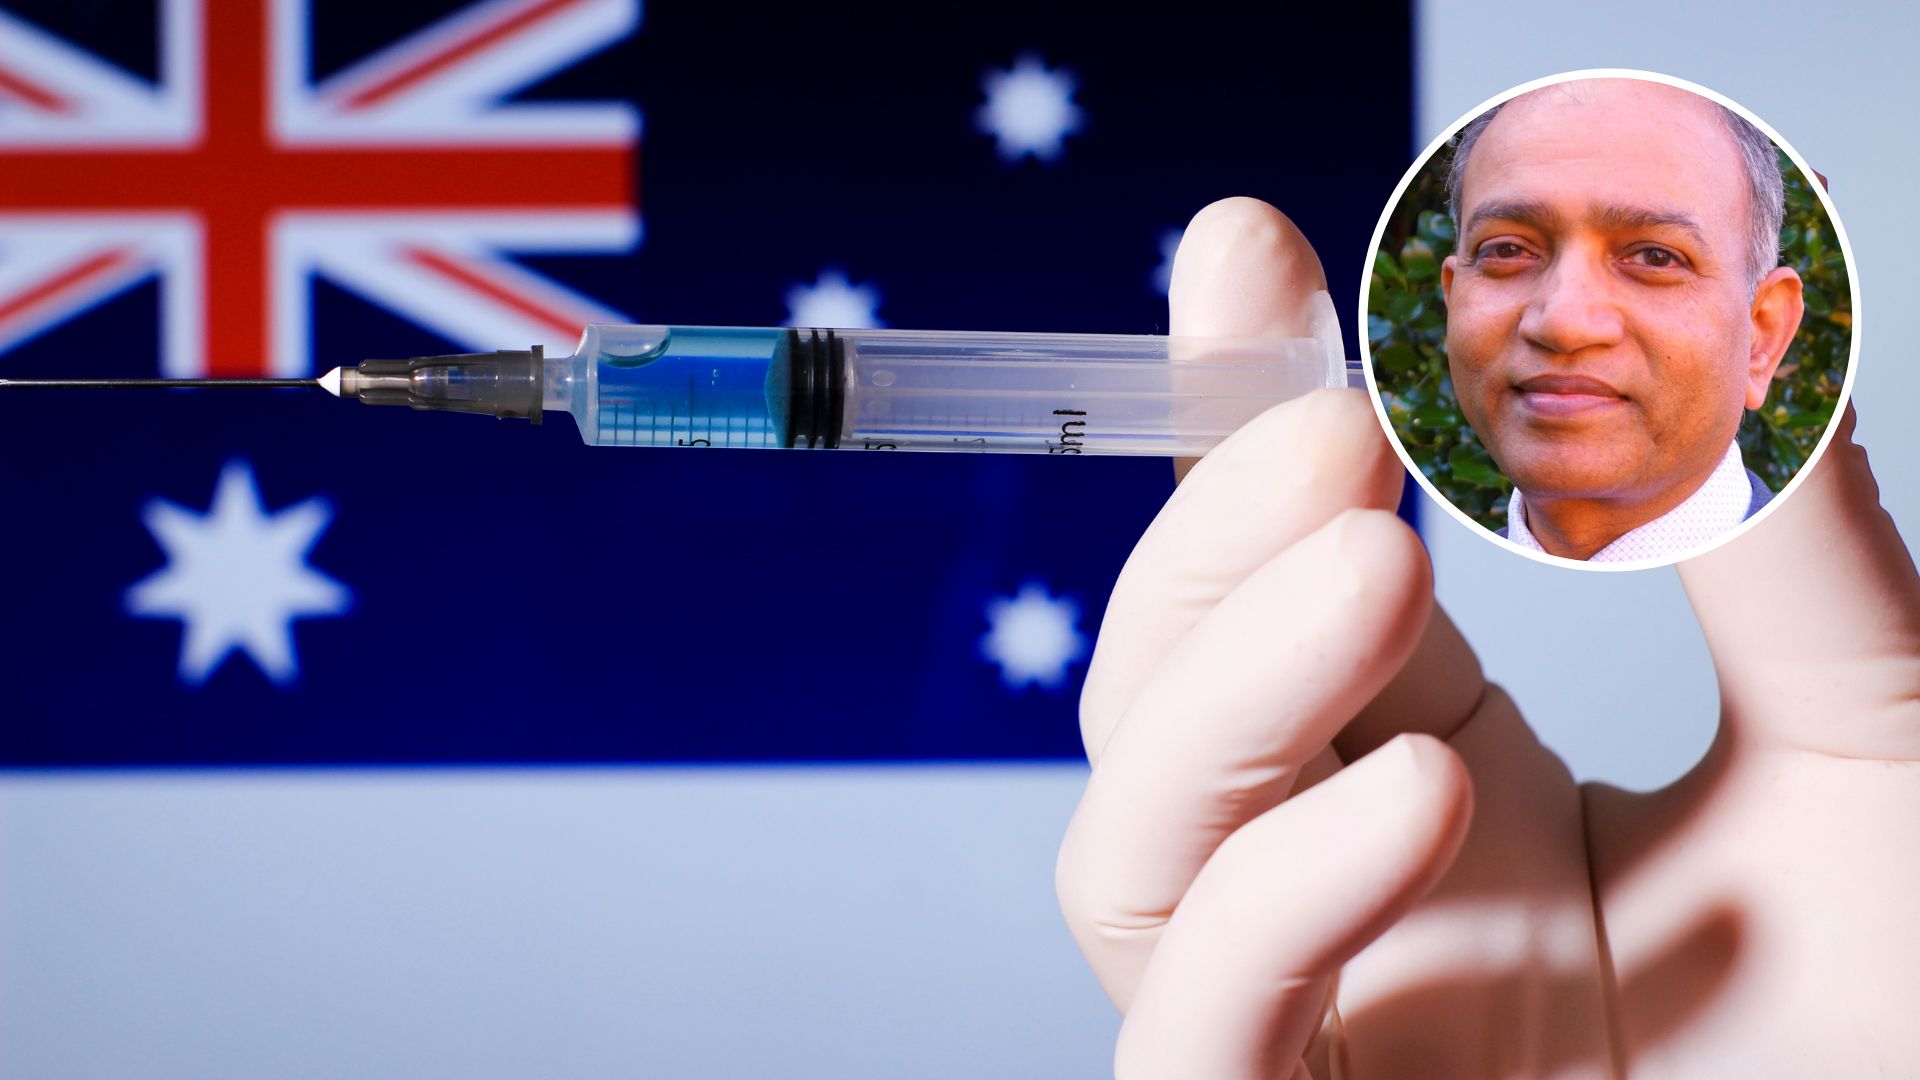 People want certainty; how to increase COVID-19 vaccination numbers